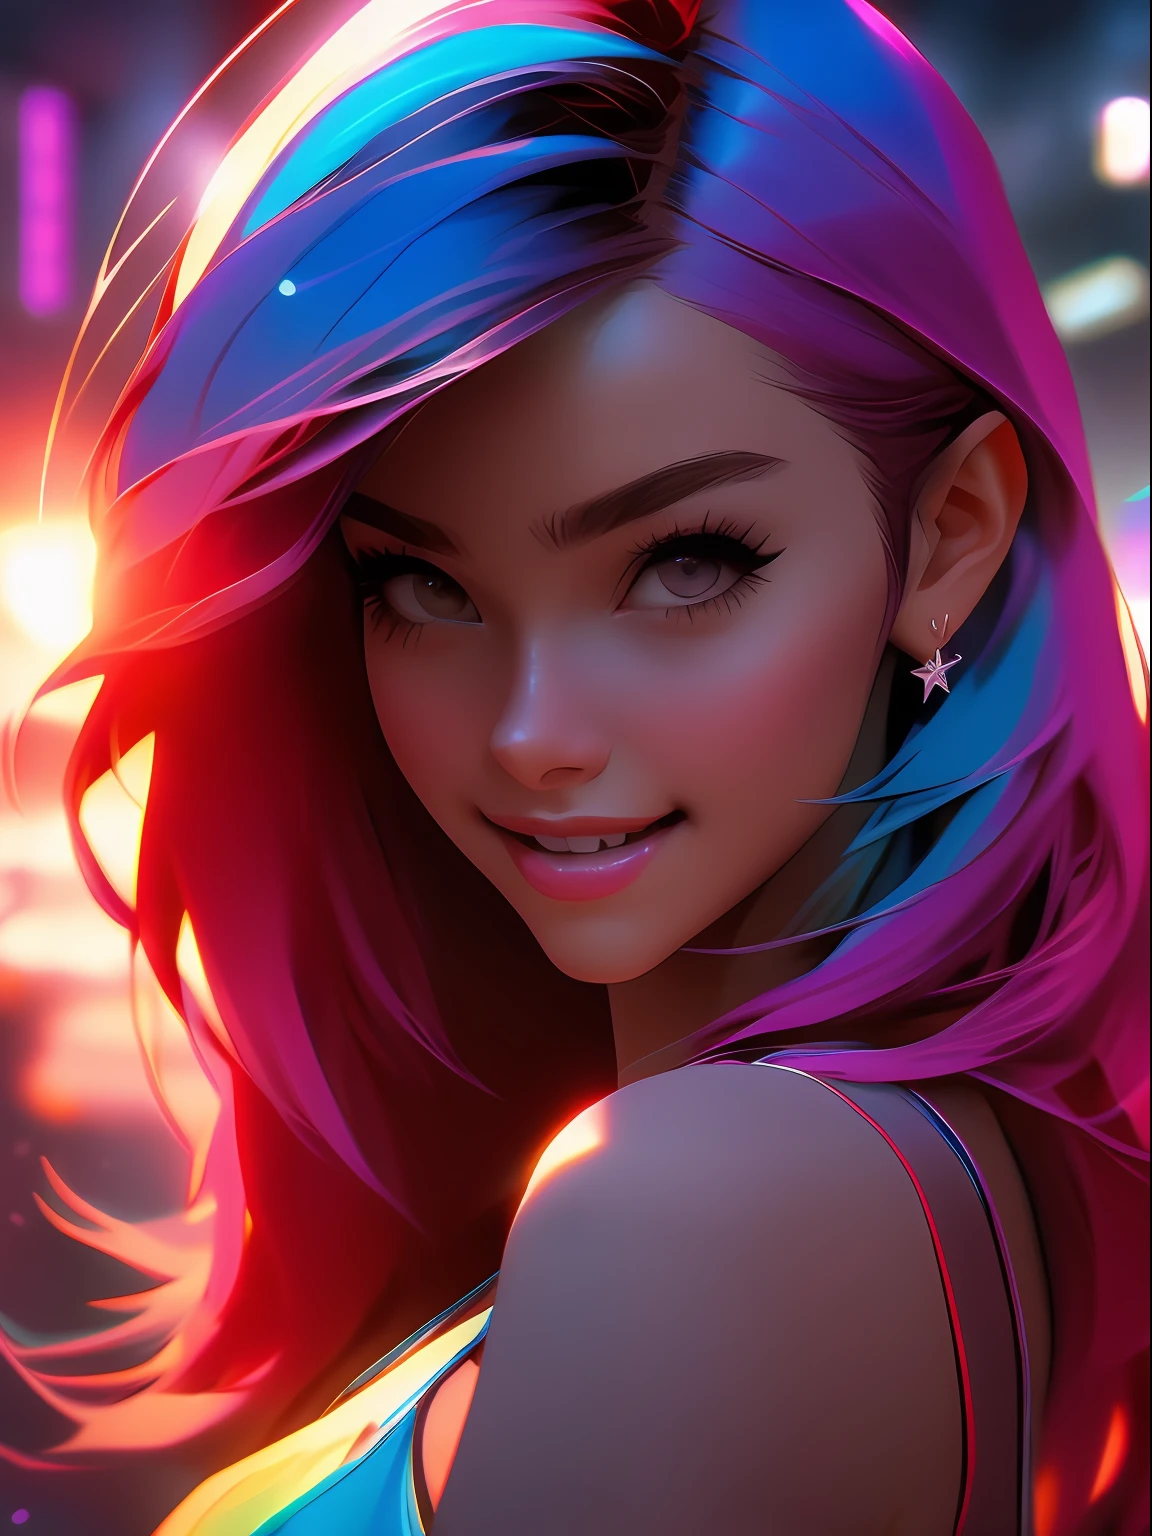 Girl , 25y,Arti Modern Anime, Birds eye View, Colege Style, Full Body, Perfect Anatomy, Red Hair, Serious Smile, Arcade Background , Photorealistic Face, Dynamic, Ultra High Quality Model, Clean Detailed Faces,Photorealistic Concept Art, Soft Natural Volumetric, Beautiful Woman, Star Eyes, Sharp Focus, Image Photorealistic, Sunrise, Pose Looking Forward, Luminous Studio Graphics Engine, Splash Art, Intricate Details, Rainbow Hair,Multiple Poses and Expressions, Perfect Hands, Octane Render, 3D Illustration, Ultra Detalist, Dark Color, Trendy Colorful Gradient, Centered, Hyper Detailed, Photorealistic Rendering, 8k HD, Focused, Super Detailed, Natural Light, Splash Art, Triadic Color, Volumetric Lighting, High resolution, Ambient Light, 8k, Glamour, Unreal Engine 5, Shader Tones, Warm tones, Lines With Cool Tones